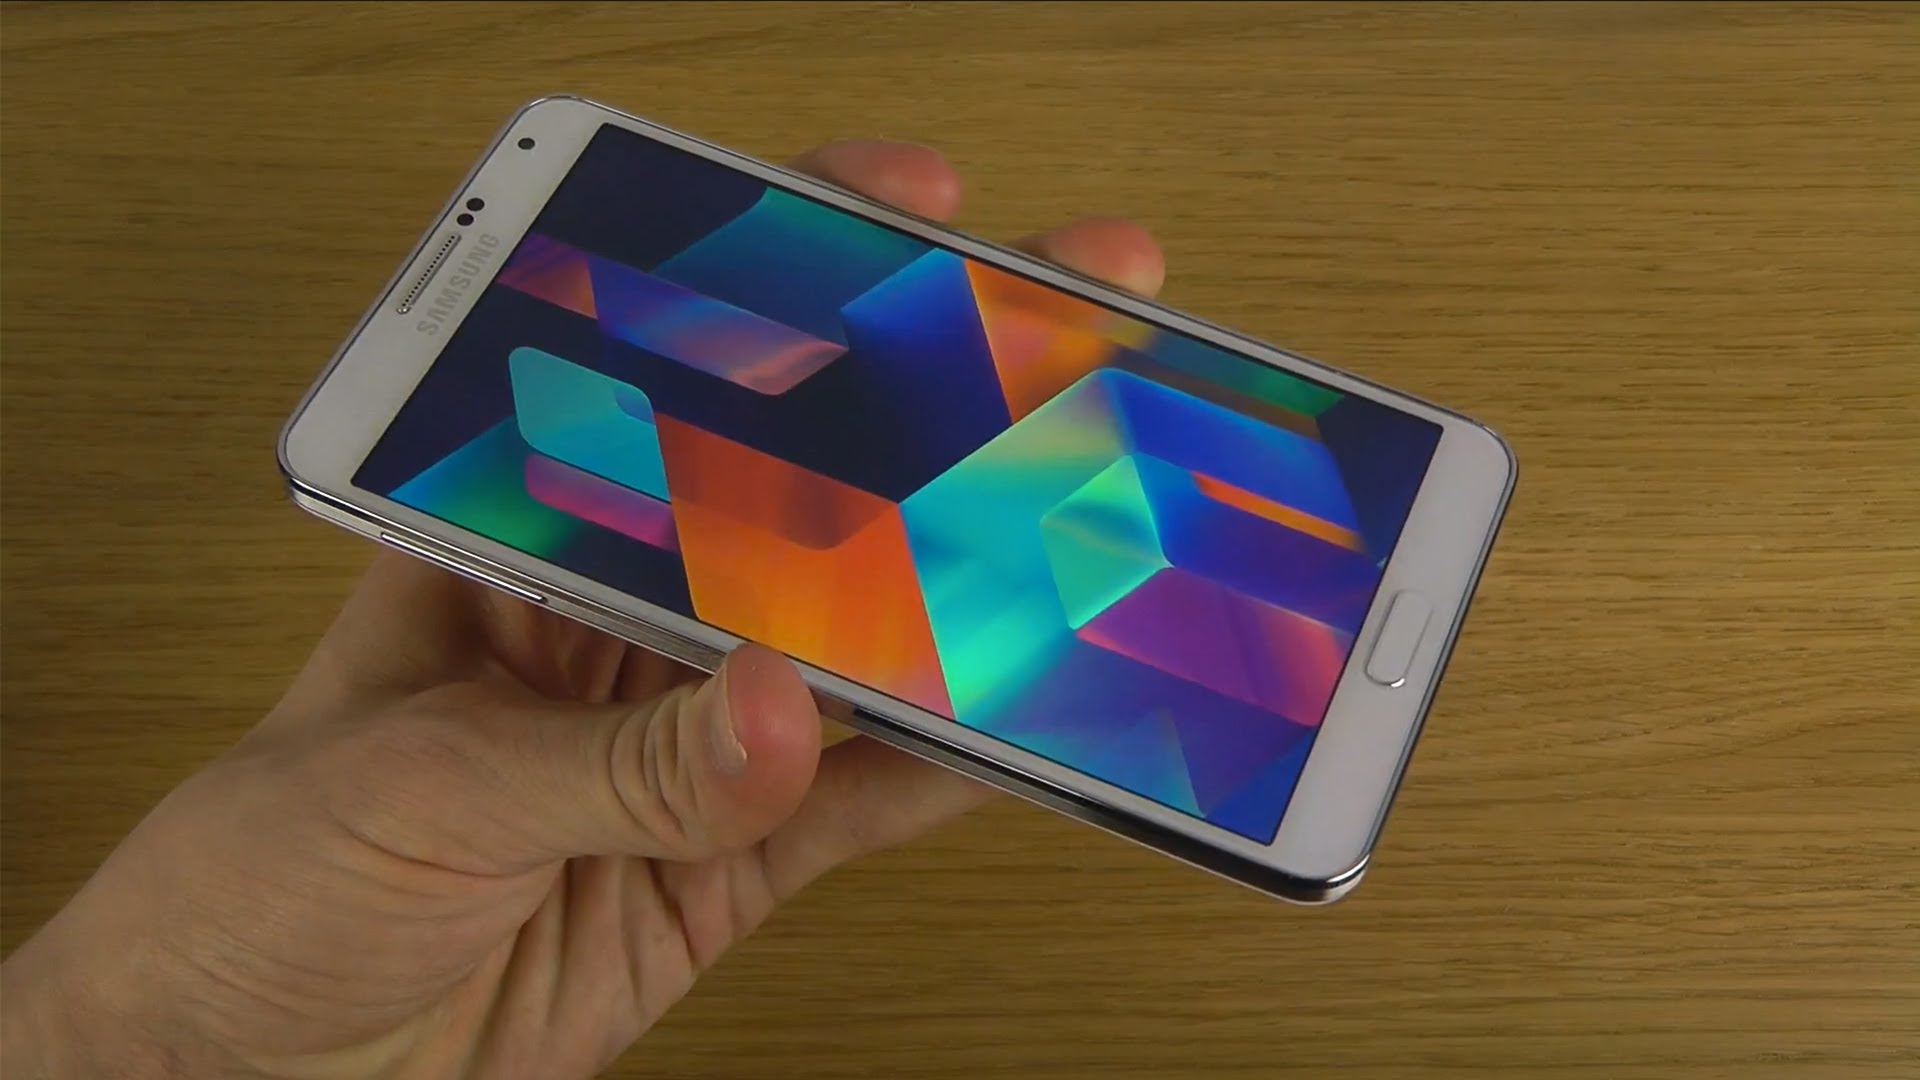 NEW Samsung Galaxy Note 3 Android 4.4 KitKat Wallpapers! - YouTube